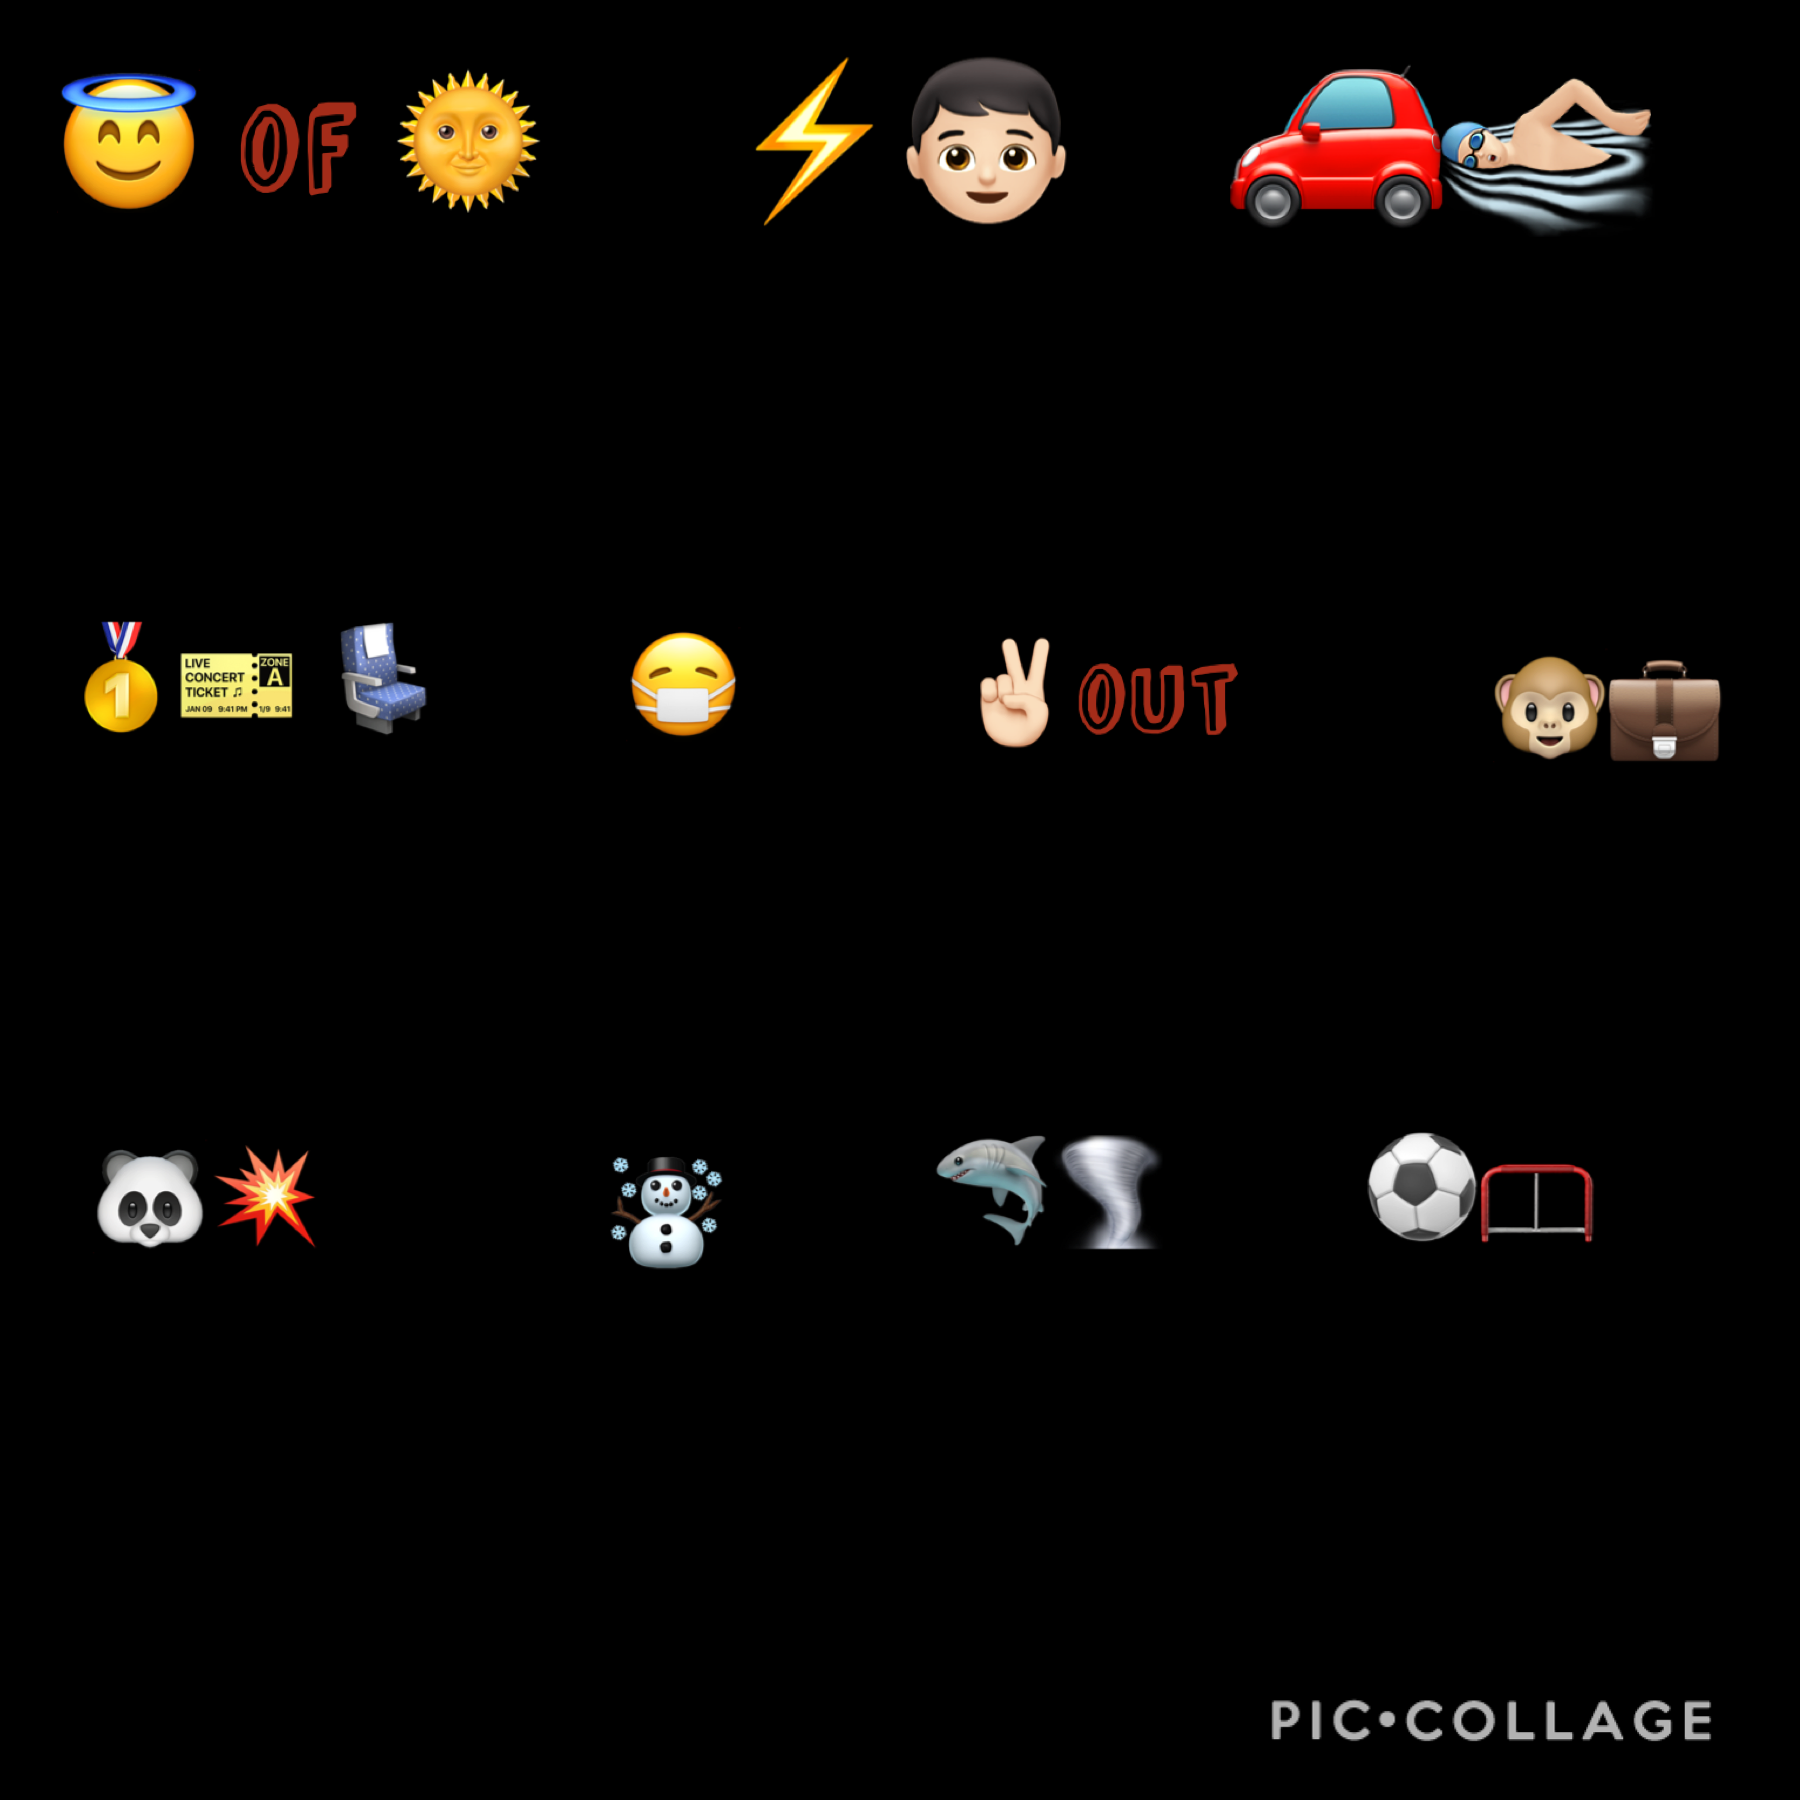 ⭐️tap⭐️
Guess that emoji made by me!!!